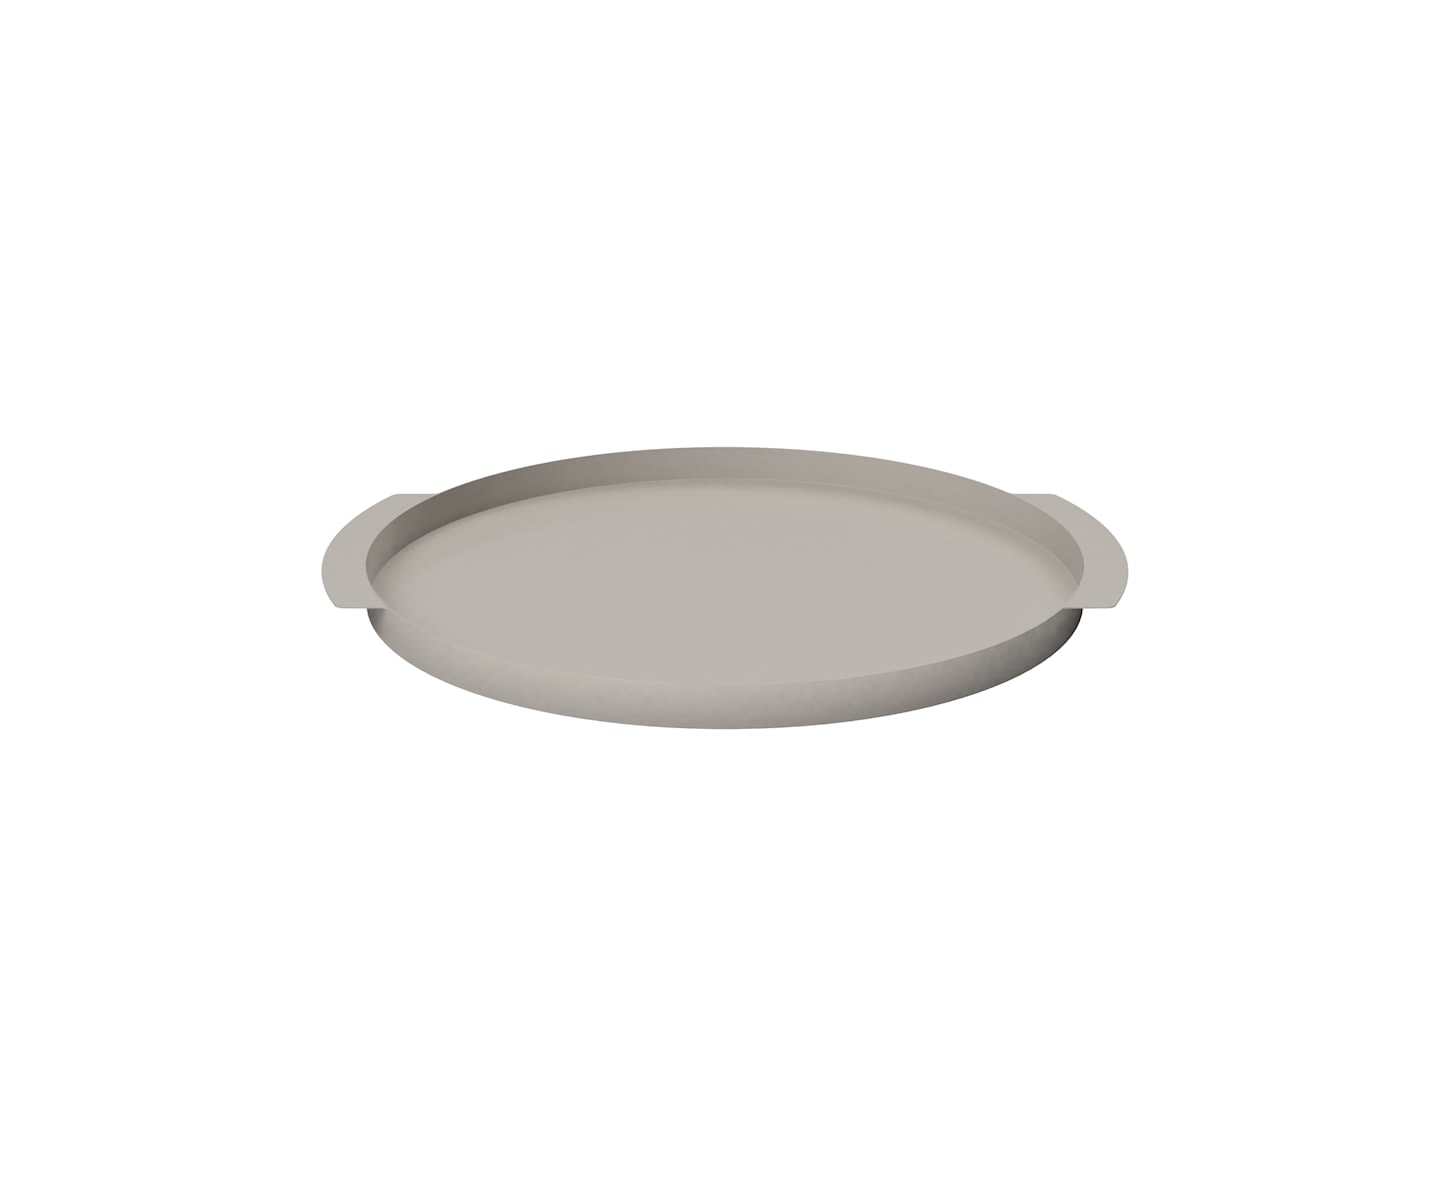 Cooee Design Tray Carry Circle Tablett Sand 35cm